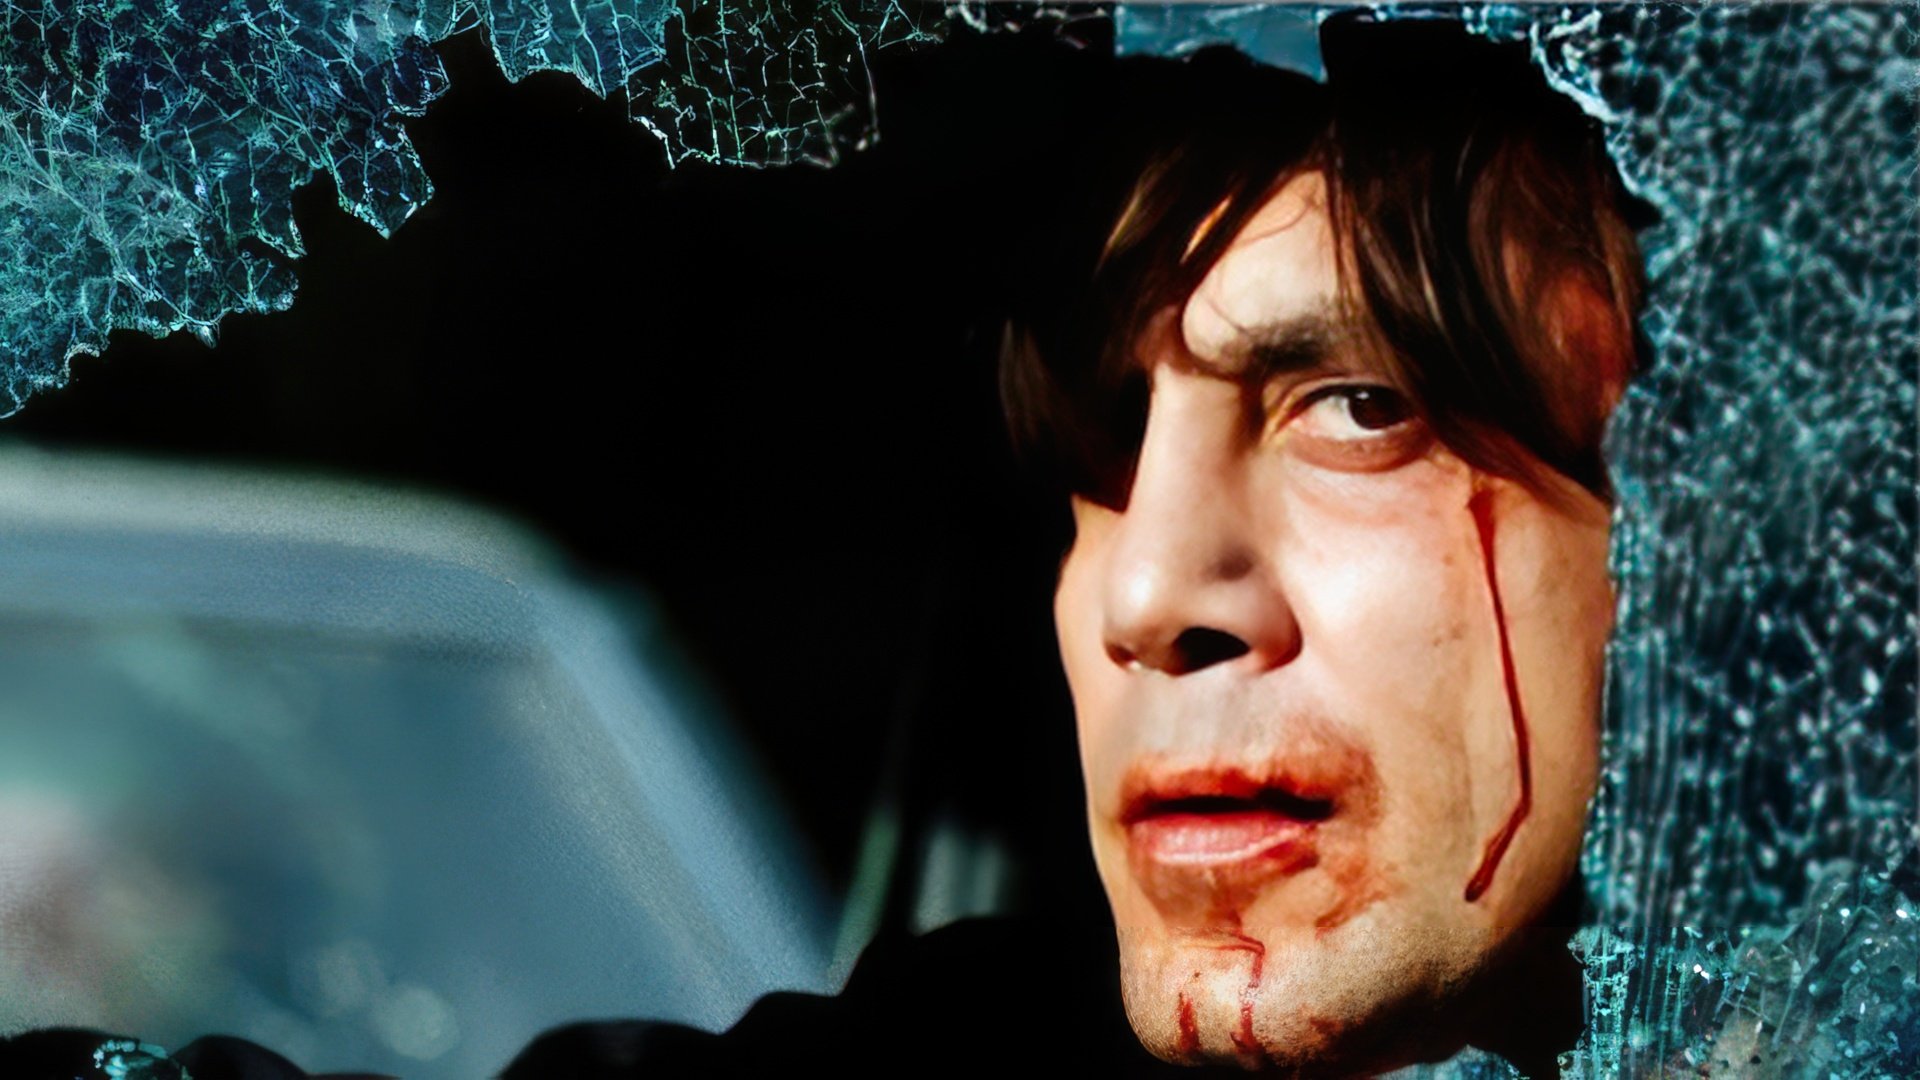 Bardem received an Oscar for Anton Chigurh from the film No Country for Old Men